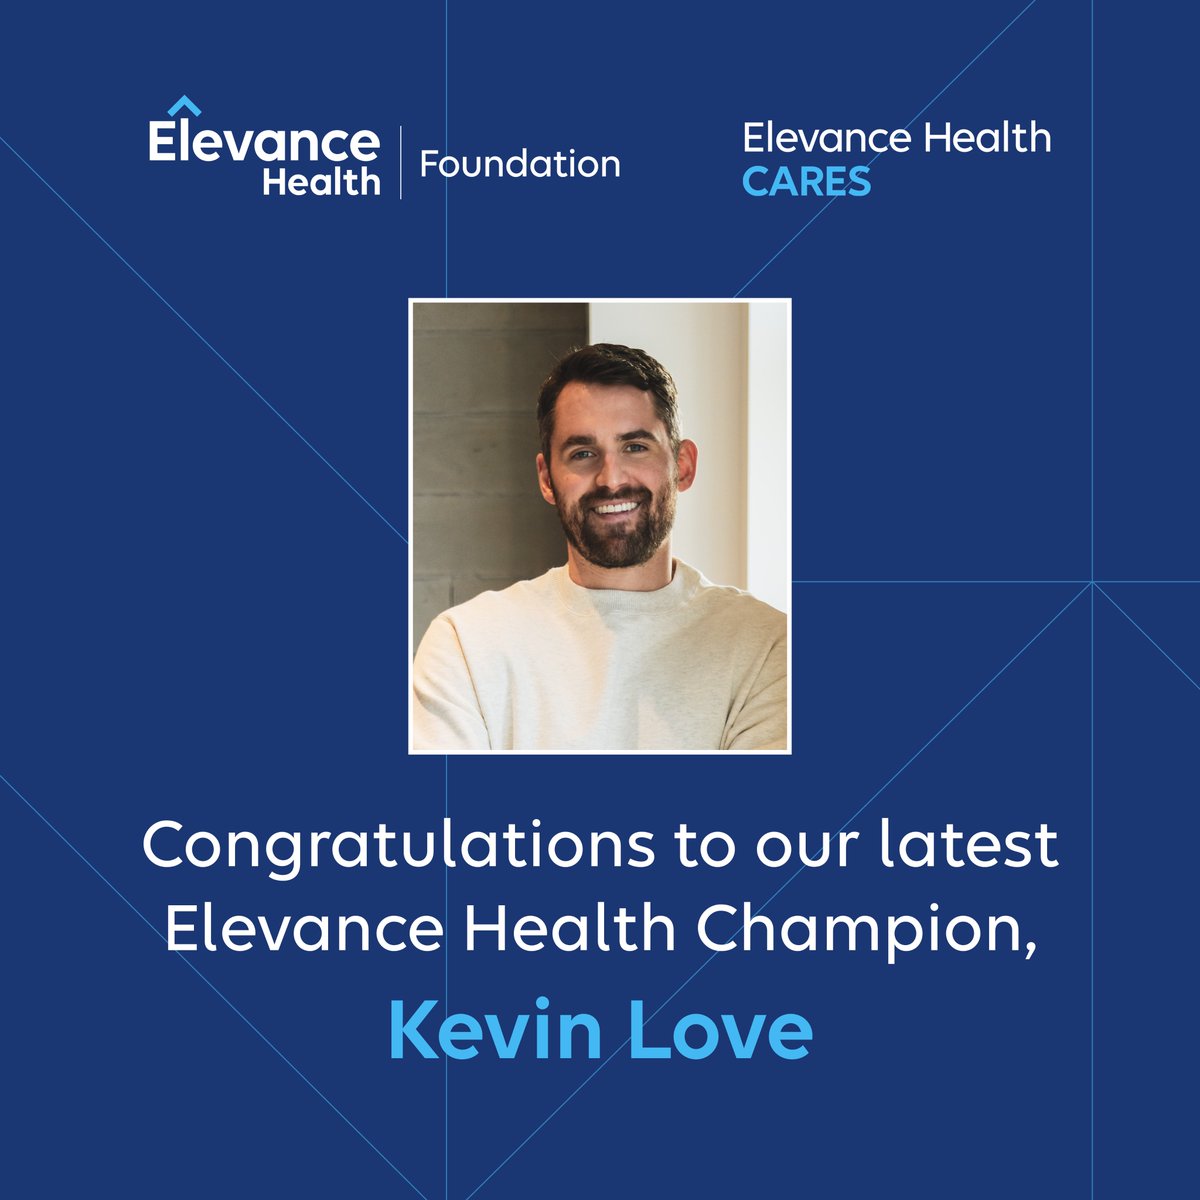 Fueled by our commitment to strengthening communities, we're excited to announce @kevinlove as our next Elevance Health Champion. After sharing his own journey, Kevin's dedicated to breaking the stigma around #mentalhealth. Congrats, Kevin! @kevinlovefund medium.com/elevancehealth…